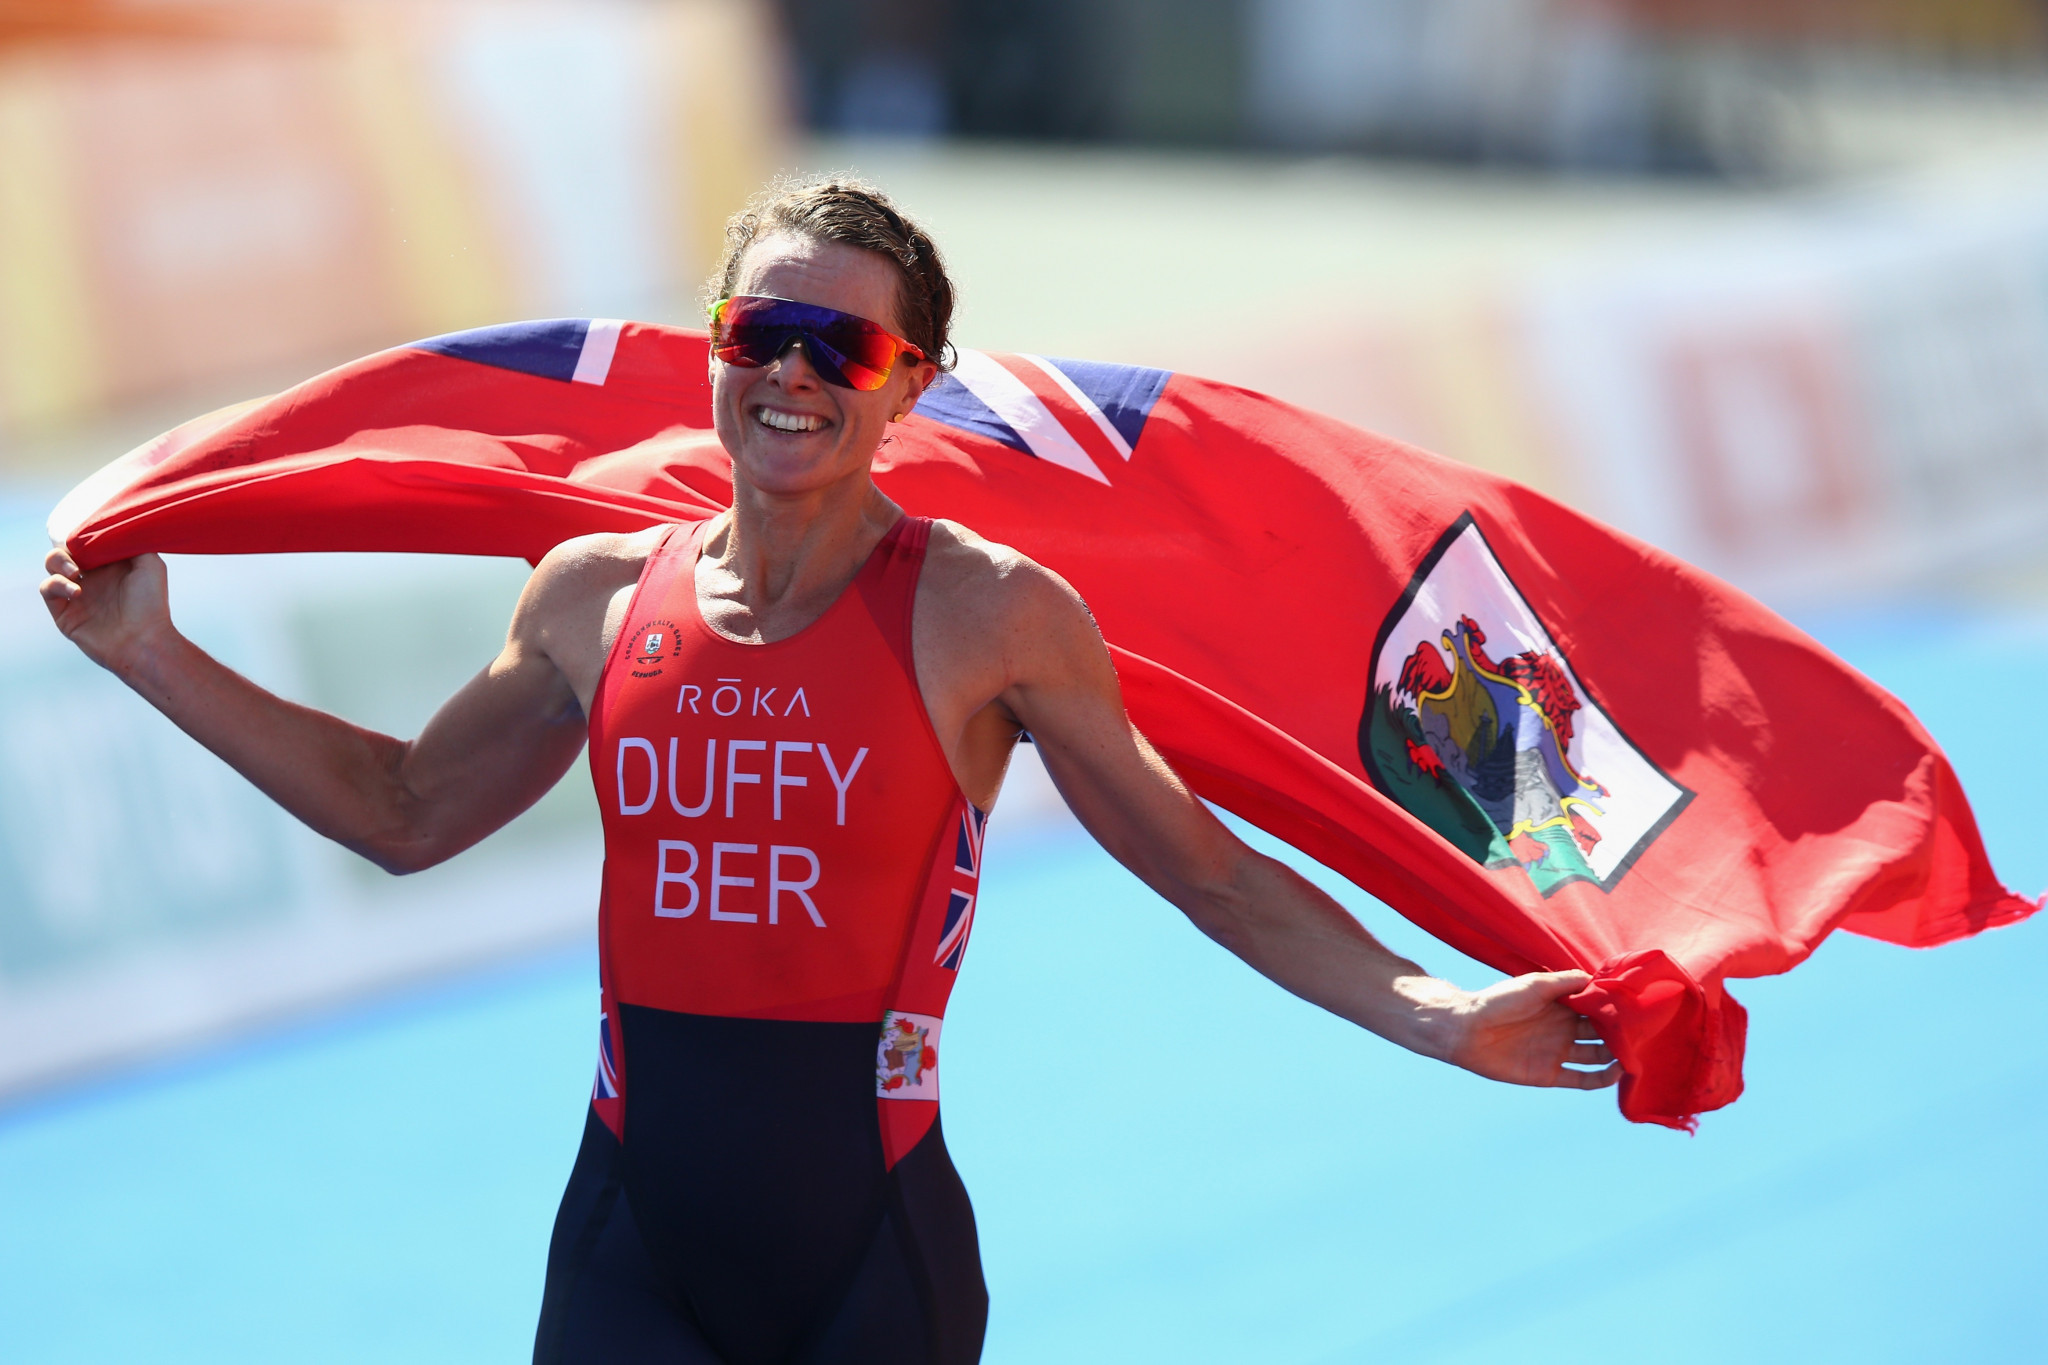 Bermuda's Flora Duffy won the women's triathlon to claim the first gold medal of a record-breaking opening day at the Gold Coast 2018 Commonwealth Games ©Getty Images